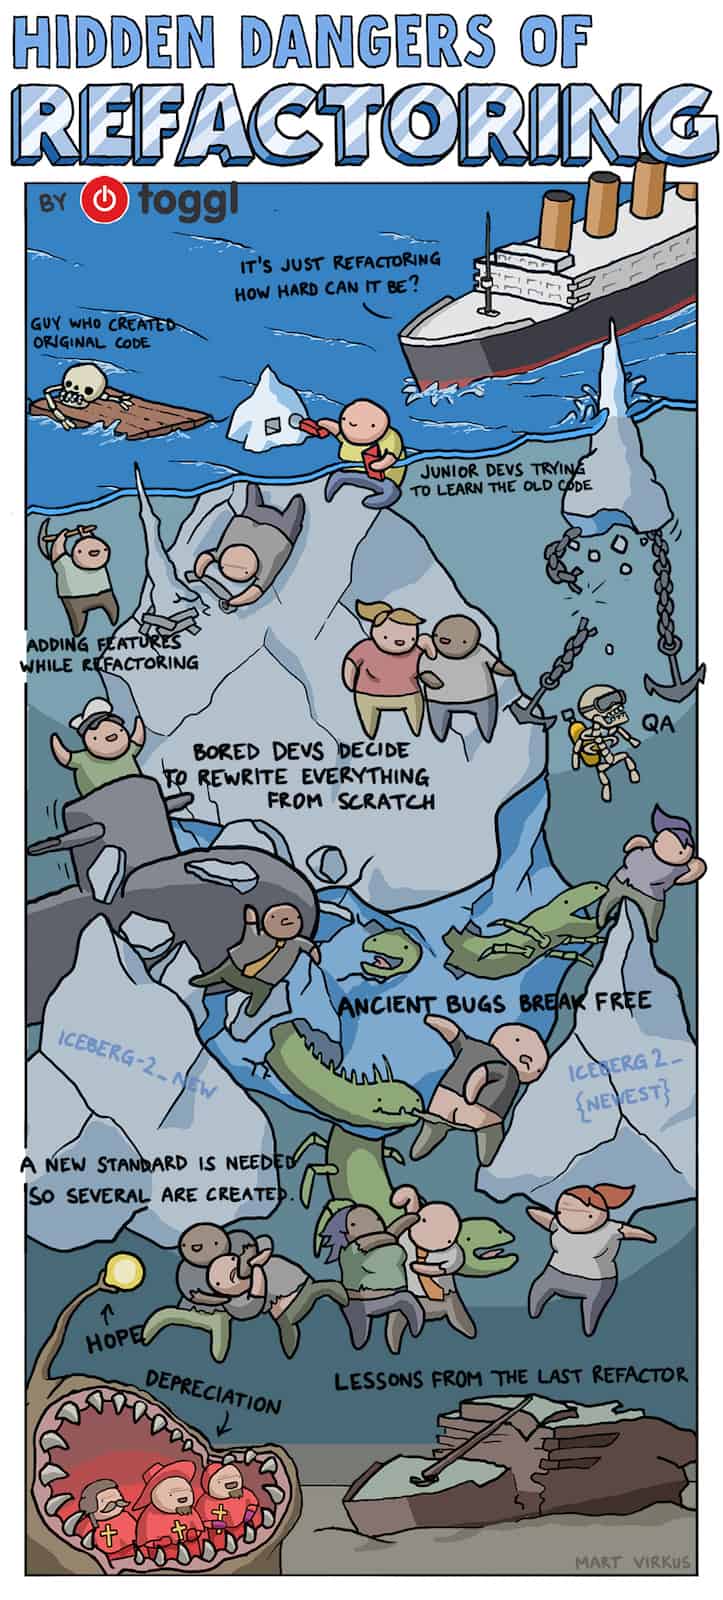 Single-panel comic about the hidden dangers of refactoring, featuring a cartoon illustration of a ship headed towards an iceberg